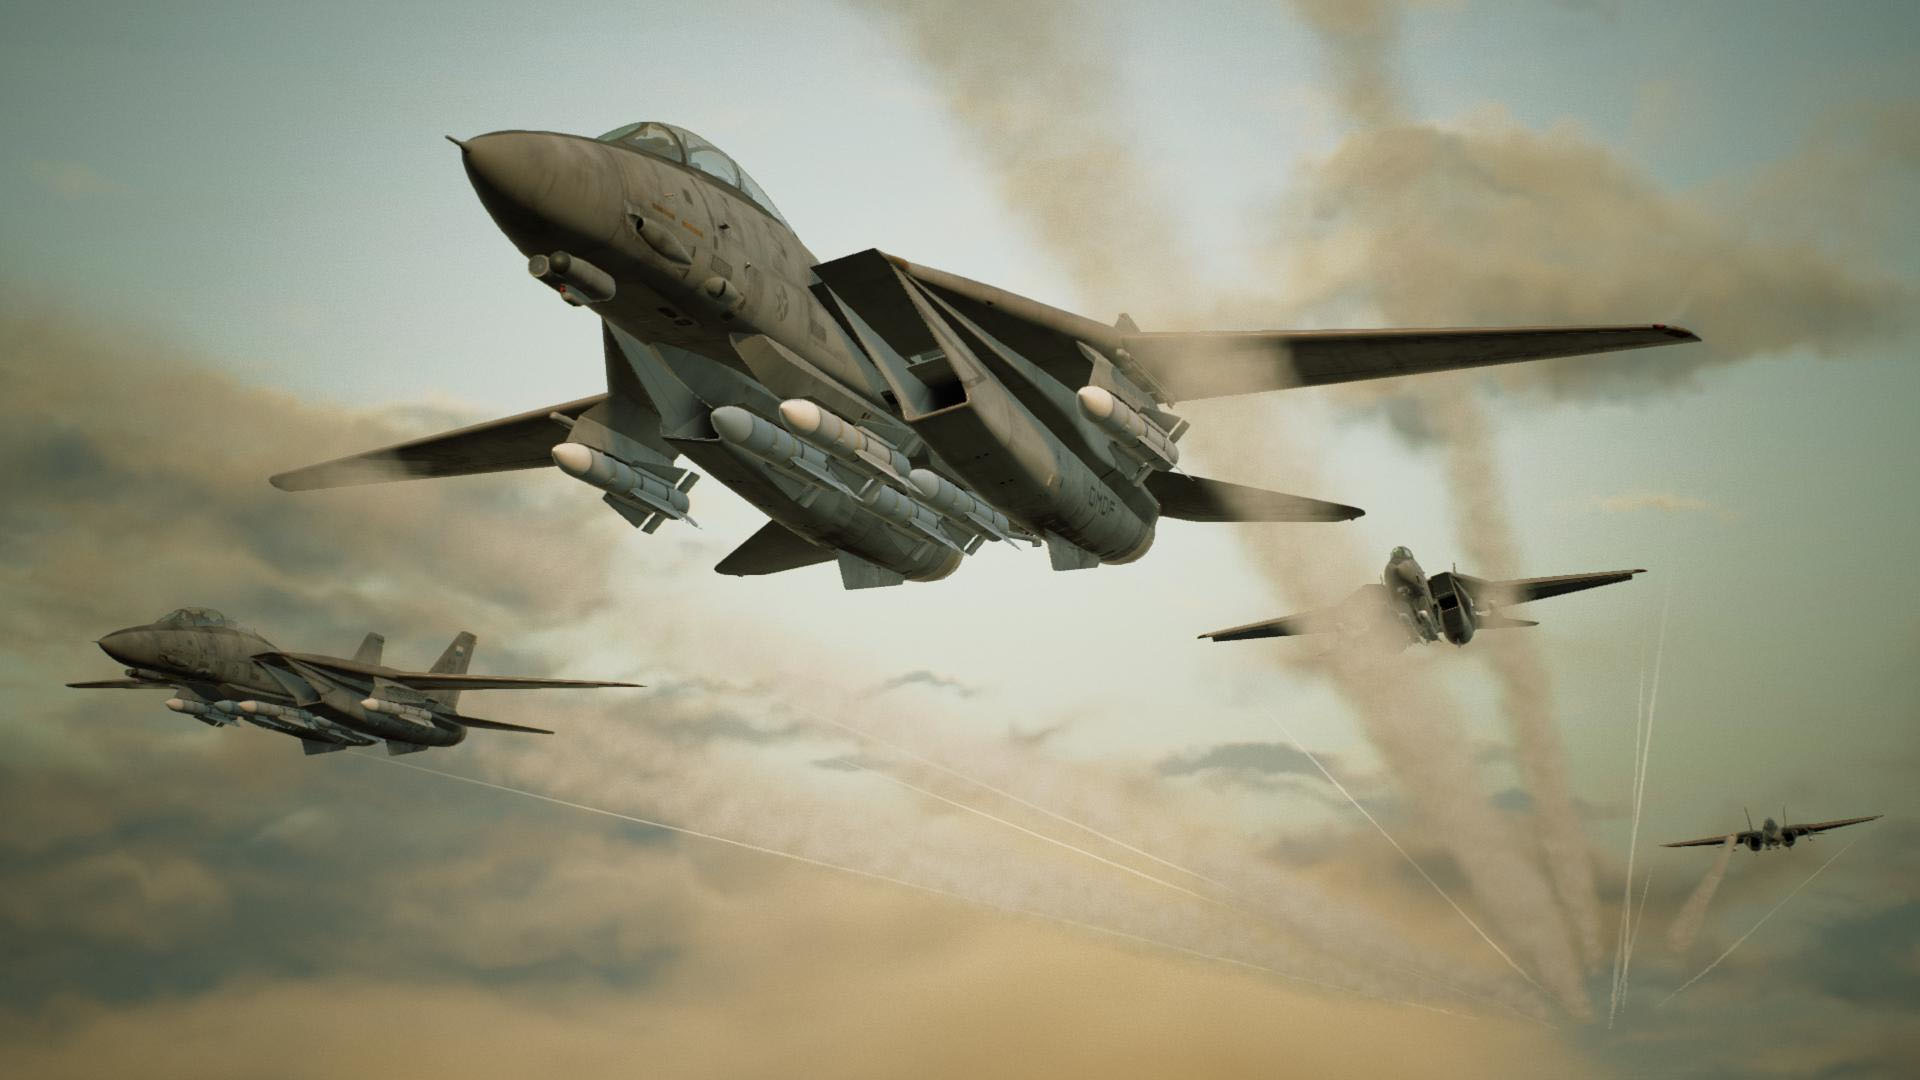 Ace Combat 7 Skies Unknown Review: Take to the skies